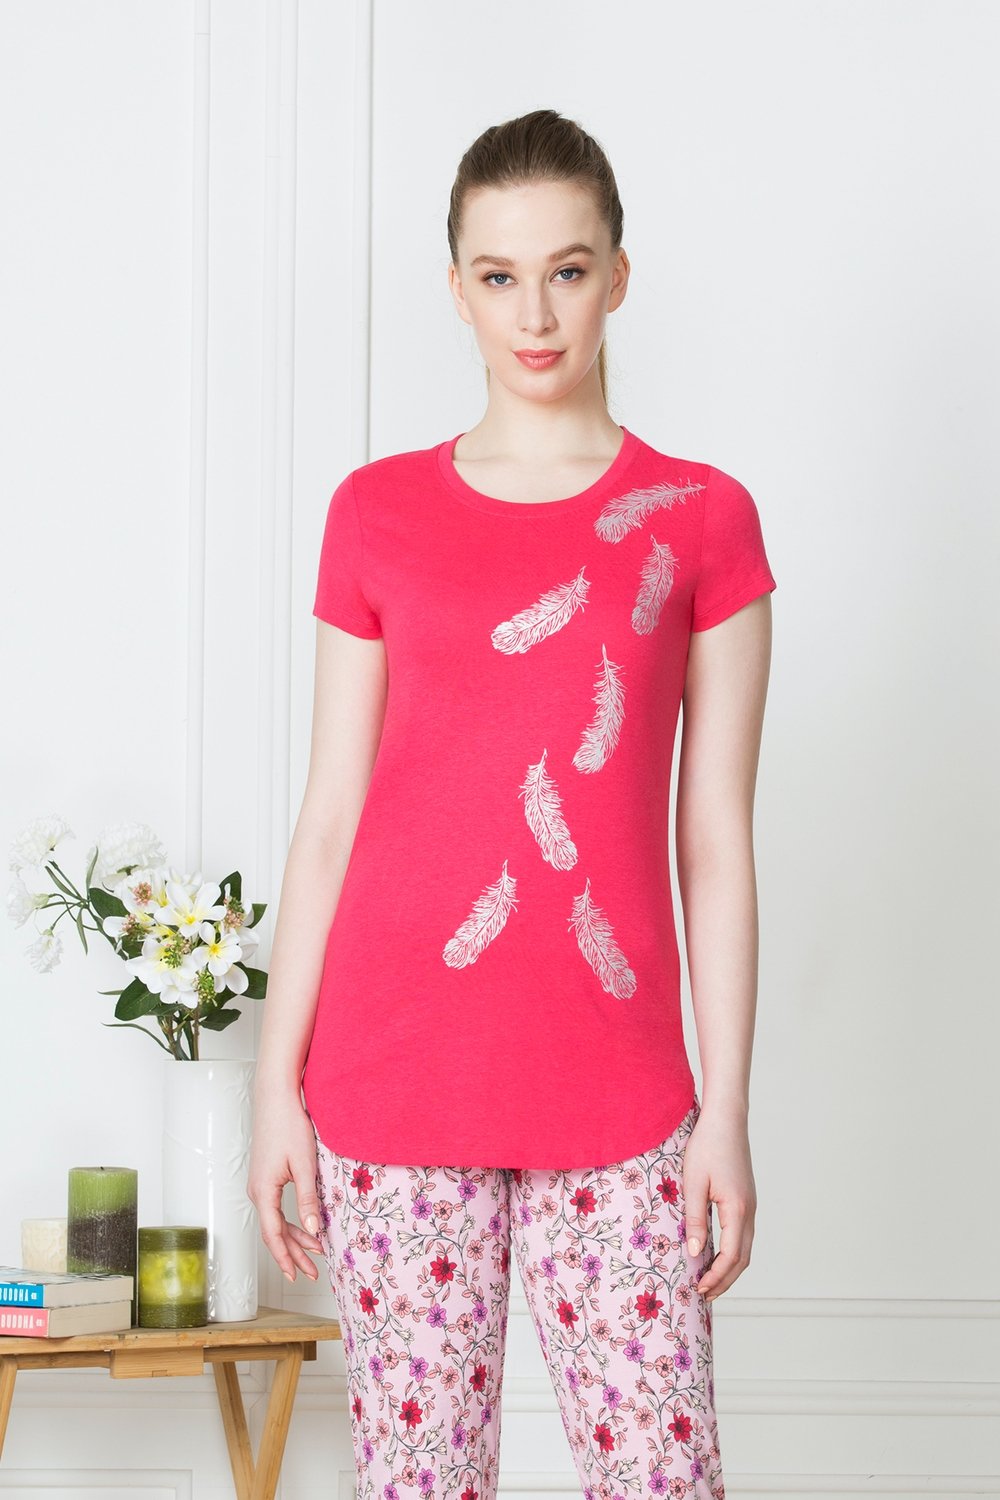 Pink Printed Long Cotton Every day Wear t-shirt tops for Women - Stilento